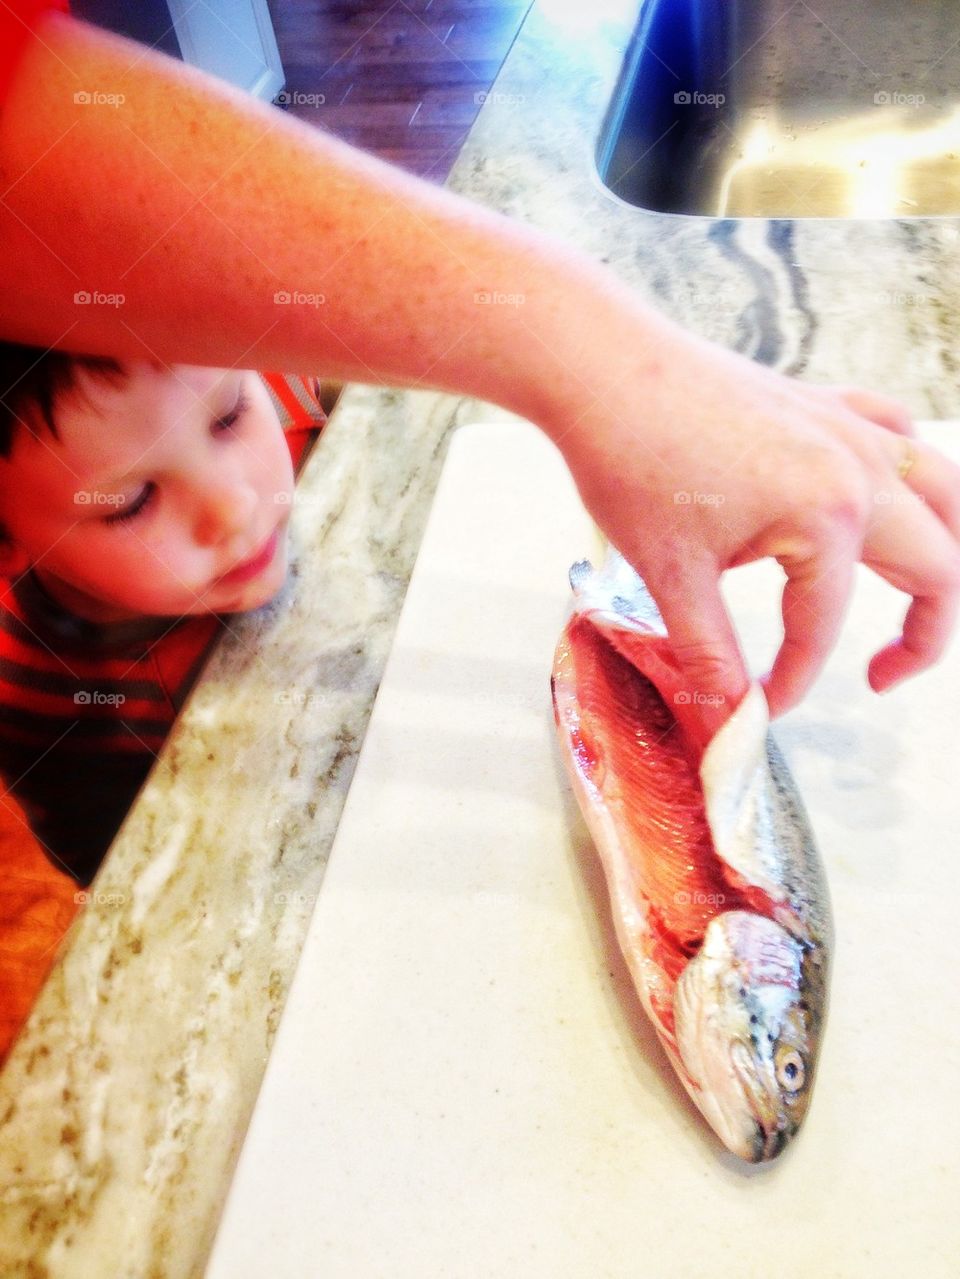 Learning How To Cook Fish. Boy Learning From Mom How To Prepare Fish
